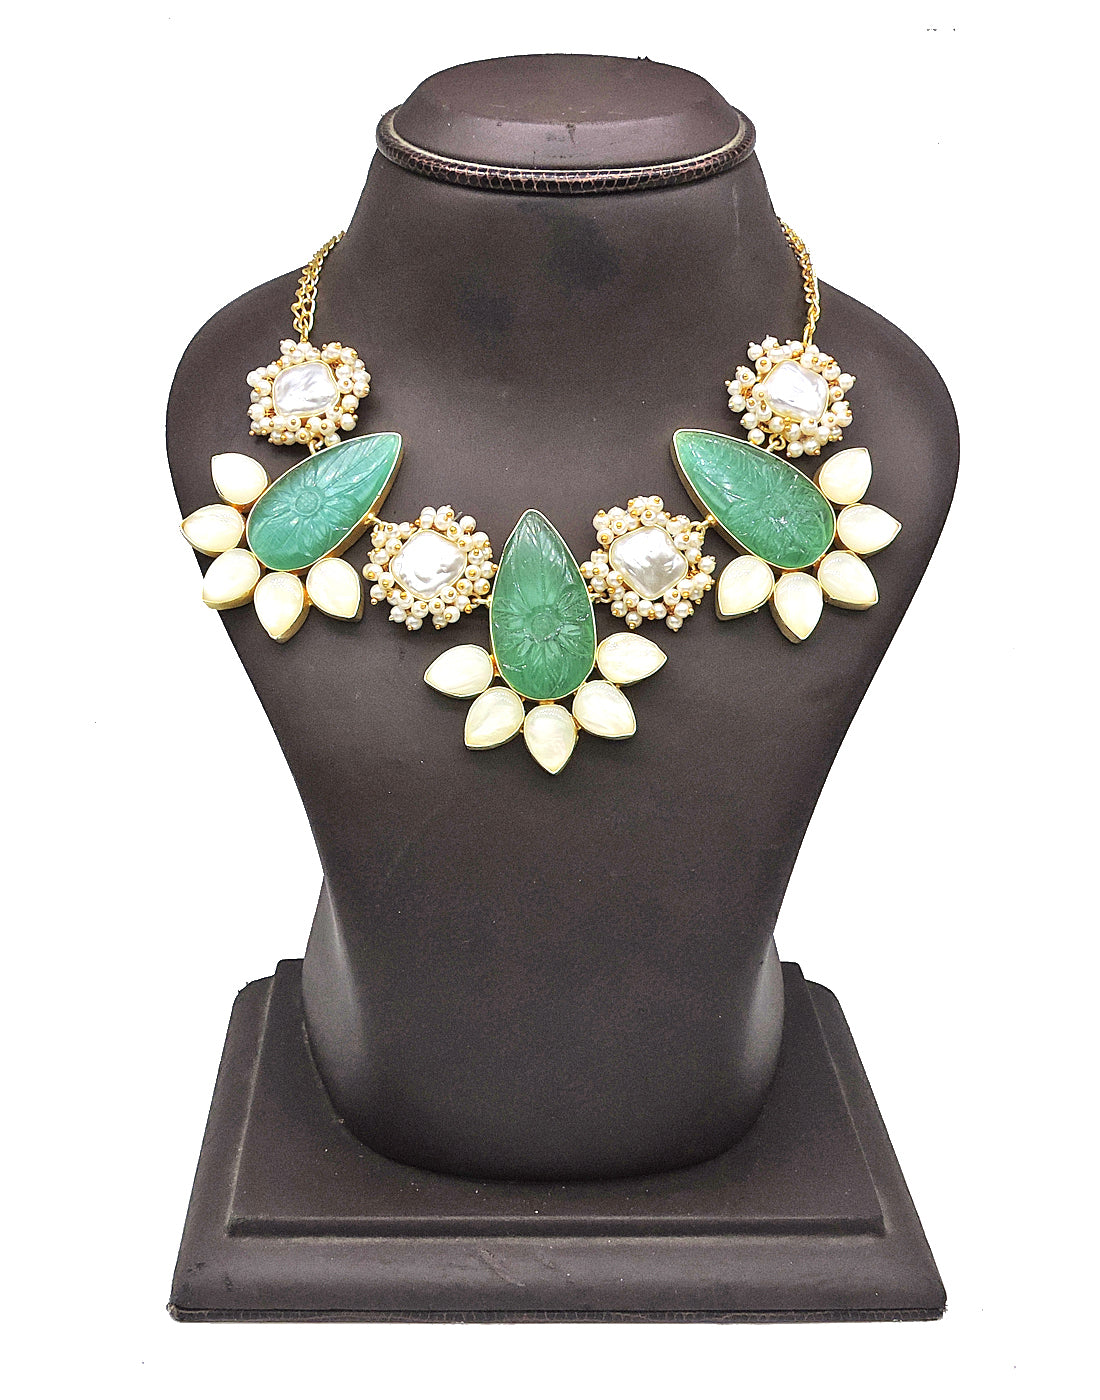 Green Haathi & Baroque Pearl Necklace - Statement Necklaces - Gold-Plated & Hypoallergenic Jewellery - Made in India - Dubai Jewellery - Dori